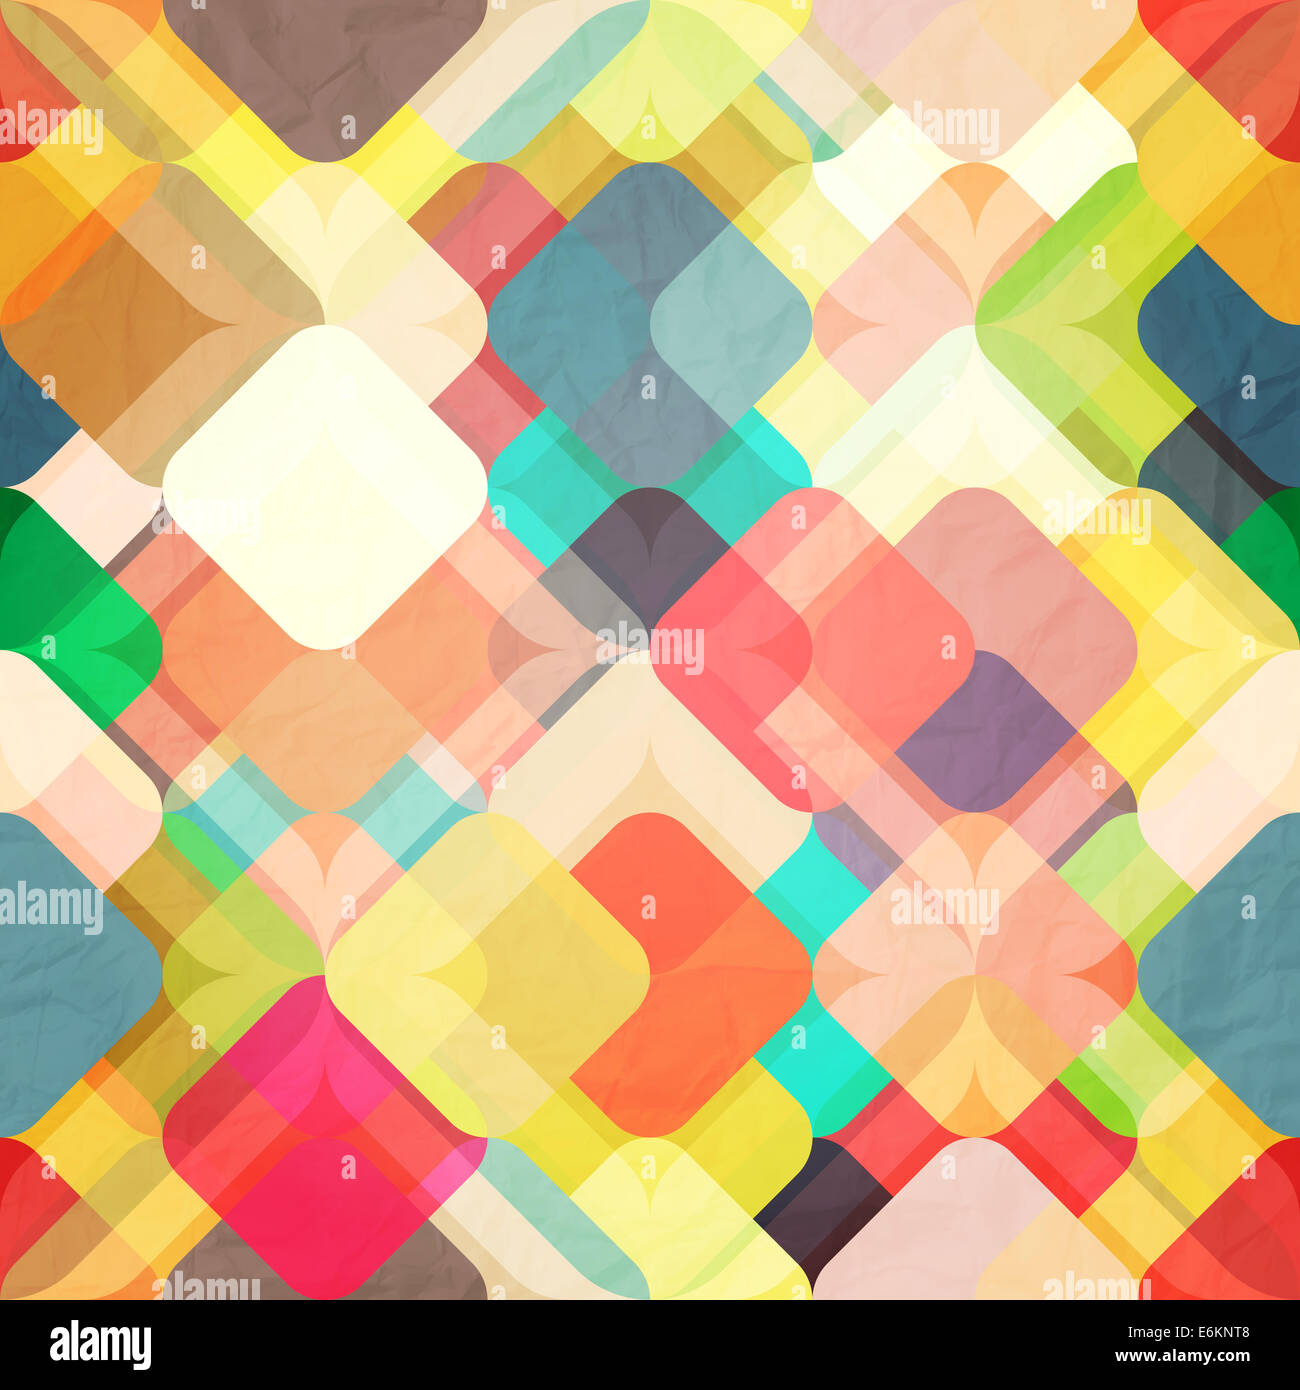 abstract seamless pattern with colorful geometric shapes. paper texture Stock Photo